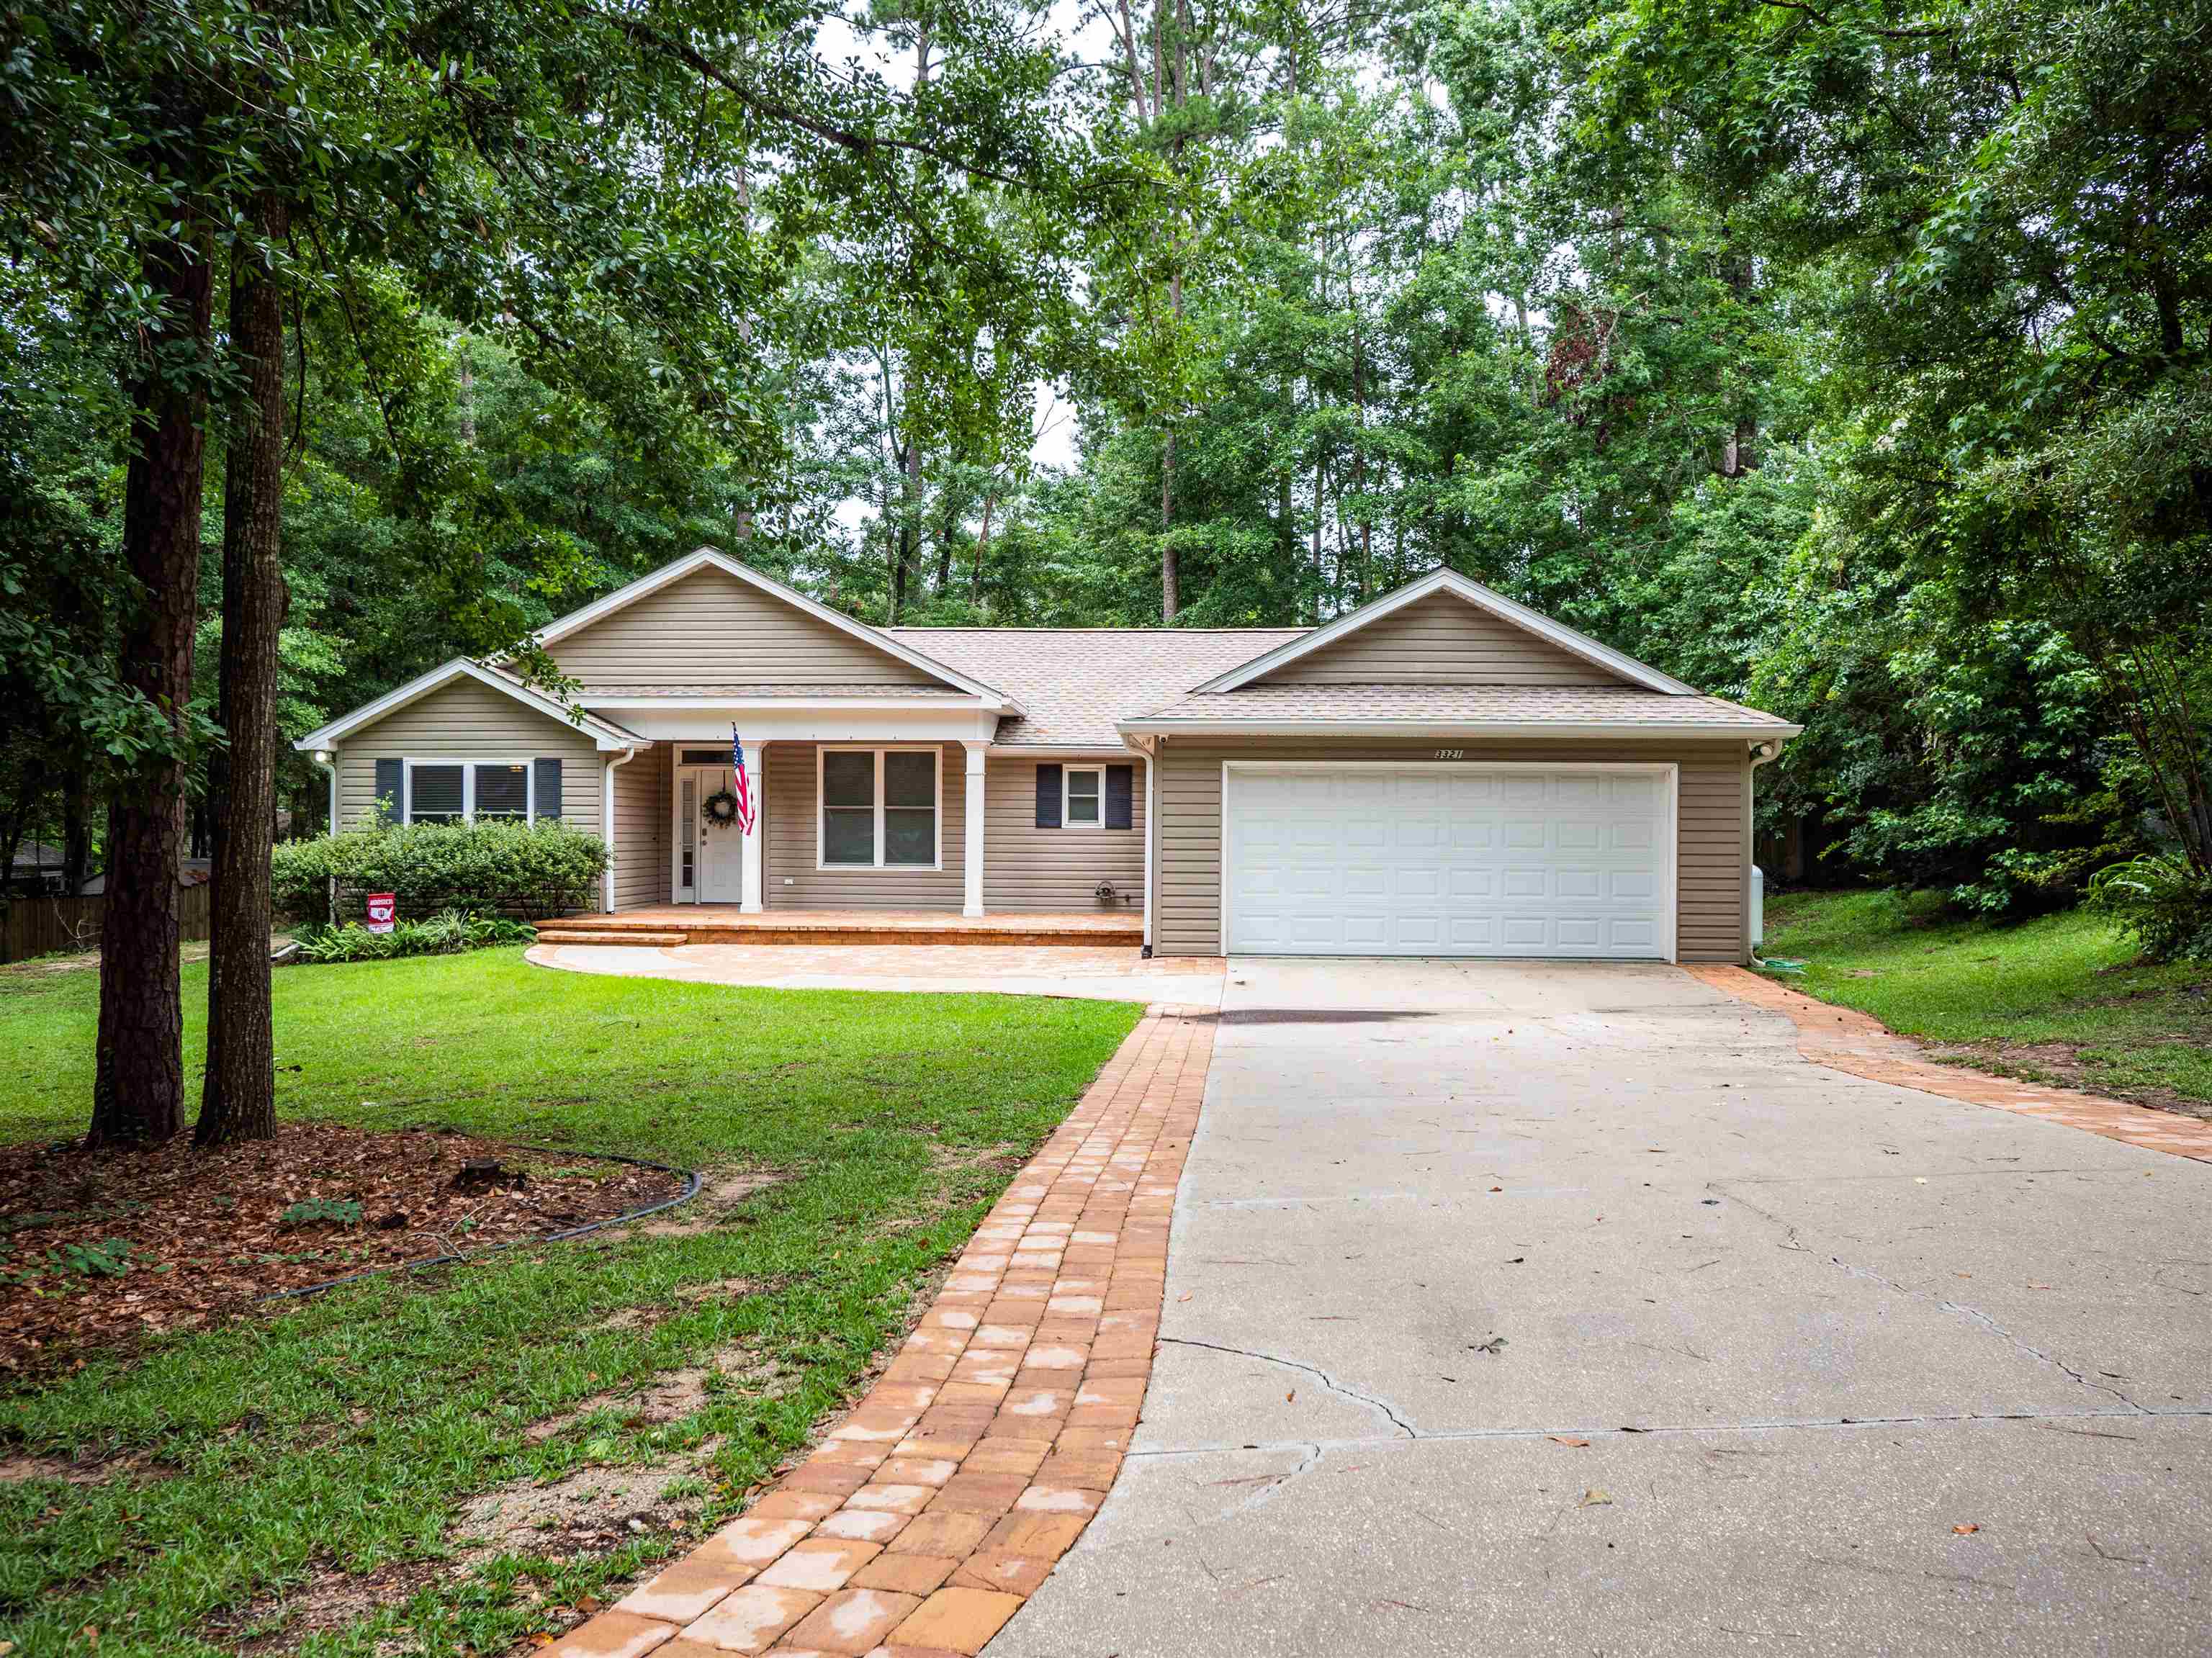 3321 Micanopy Trail,TALLAHASSEE,Florida 32312,3 Bedrooms Bedrooms,2 BathroomsBathrooms,Detached single family,3321 Micanopy Trail,361473